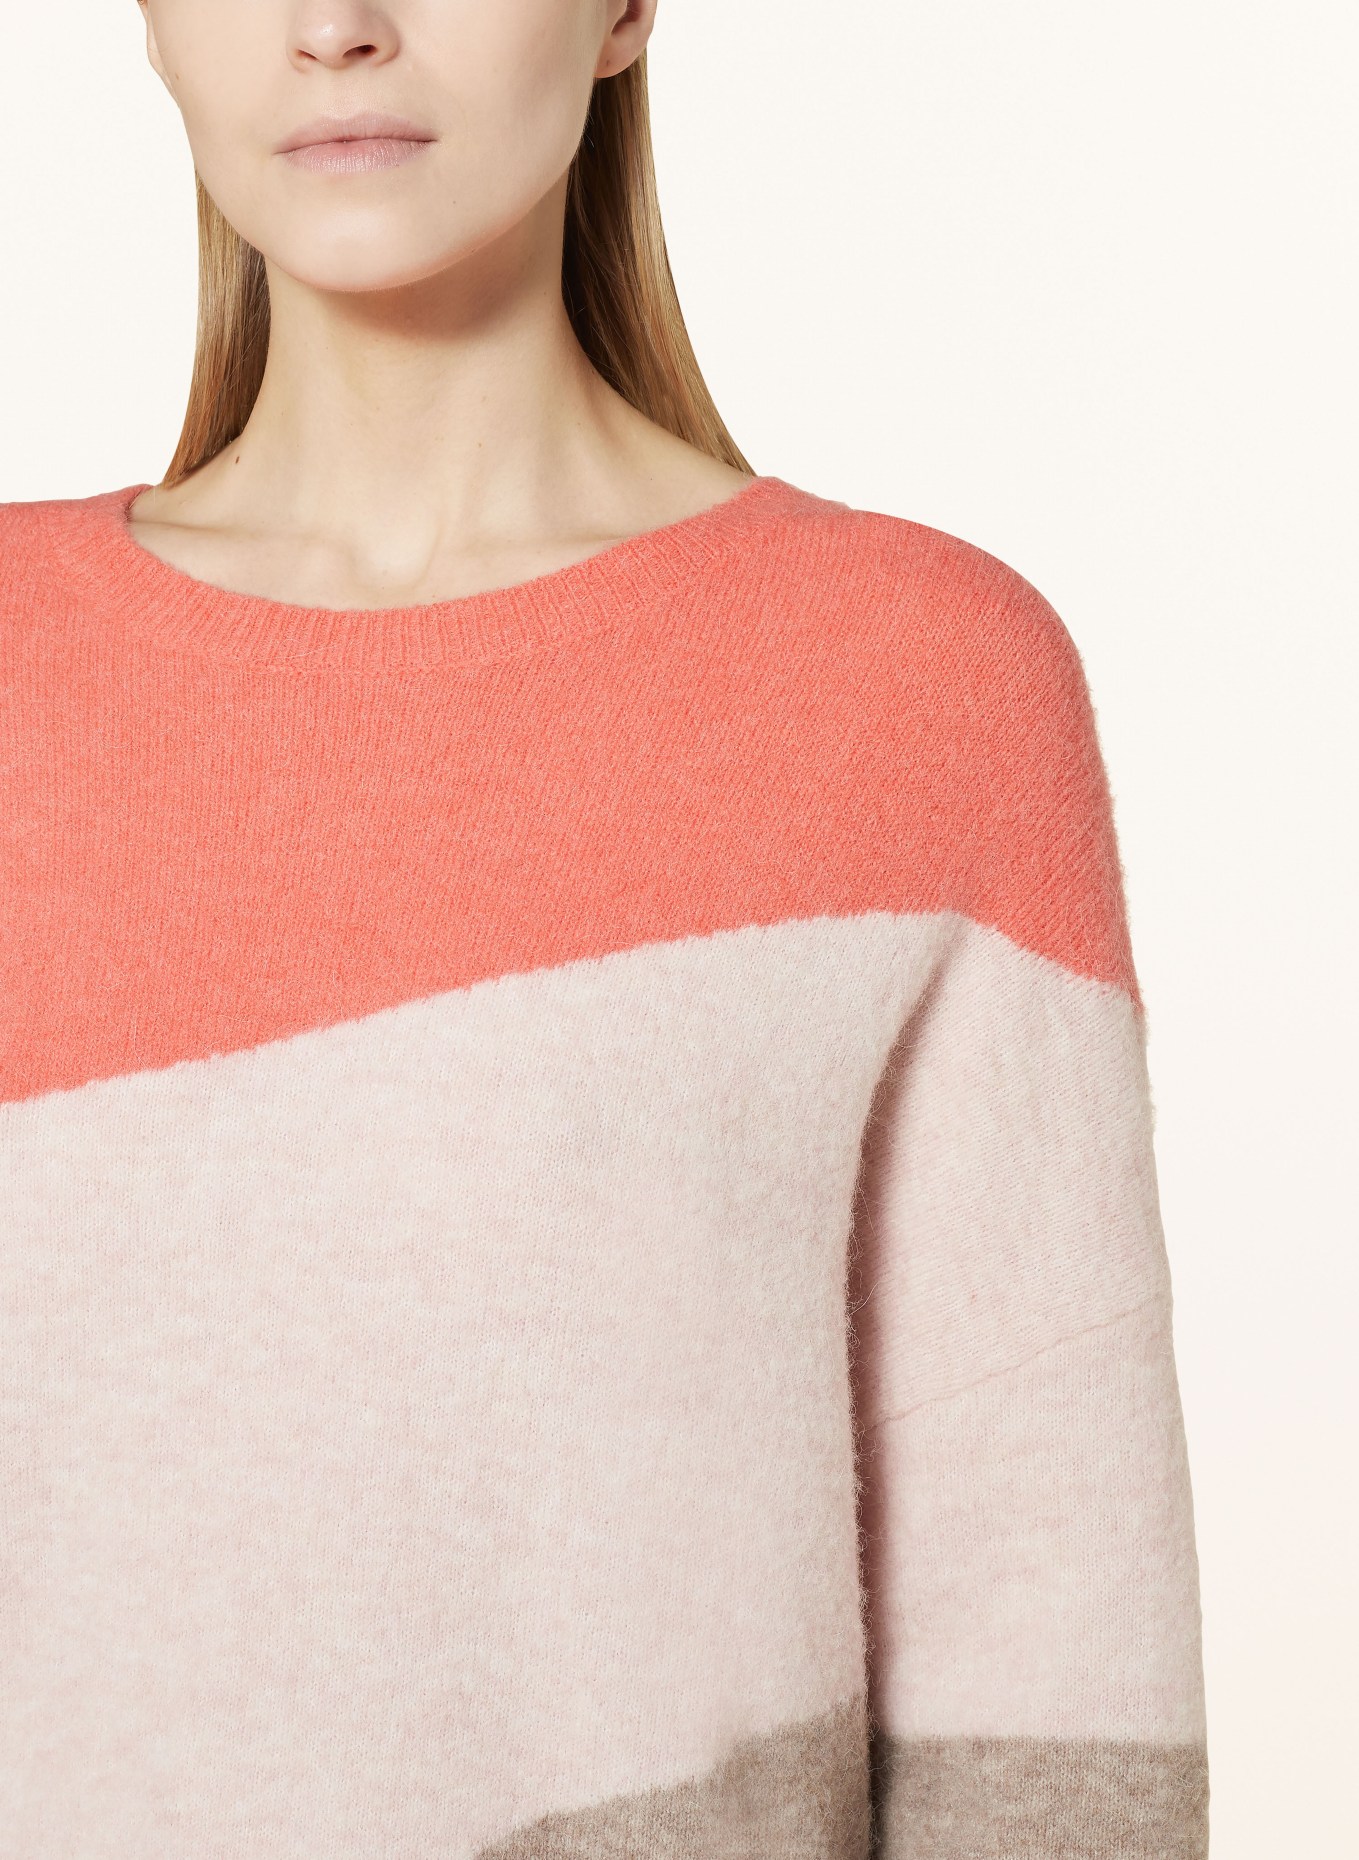 FYNCH-HATTON Sweater with alpaca, Color: LIGHT PINK/ LIGHT RED/ BEIGE (Image 4)